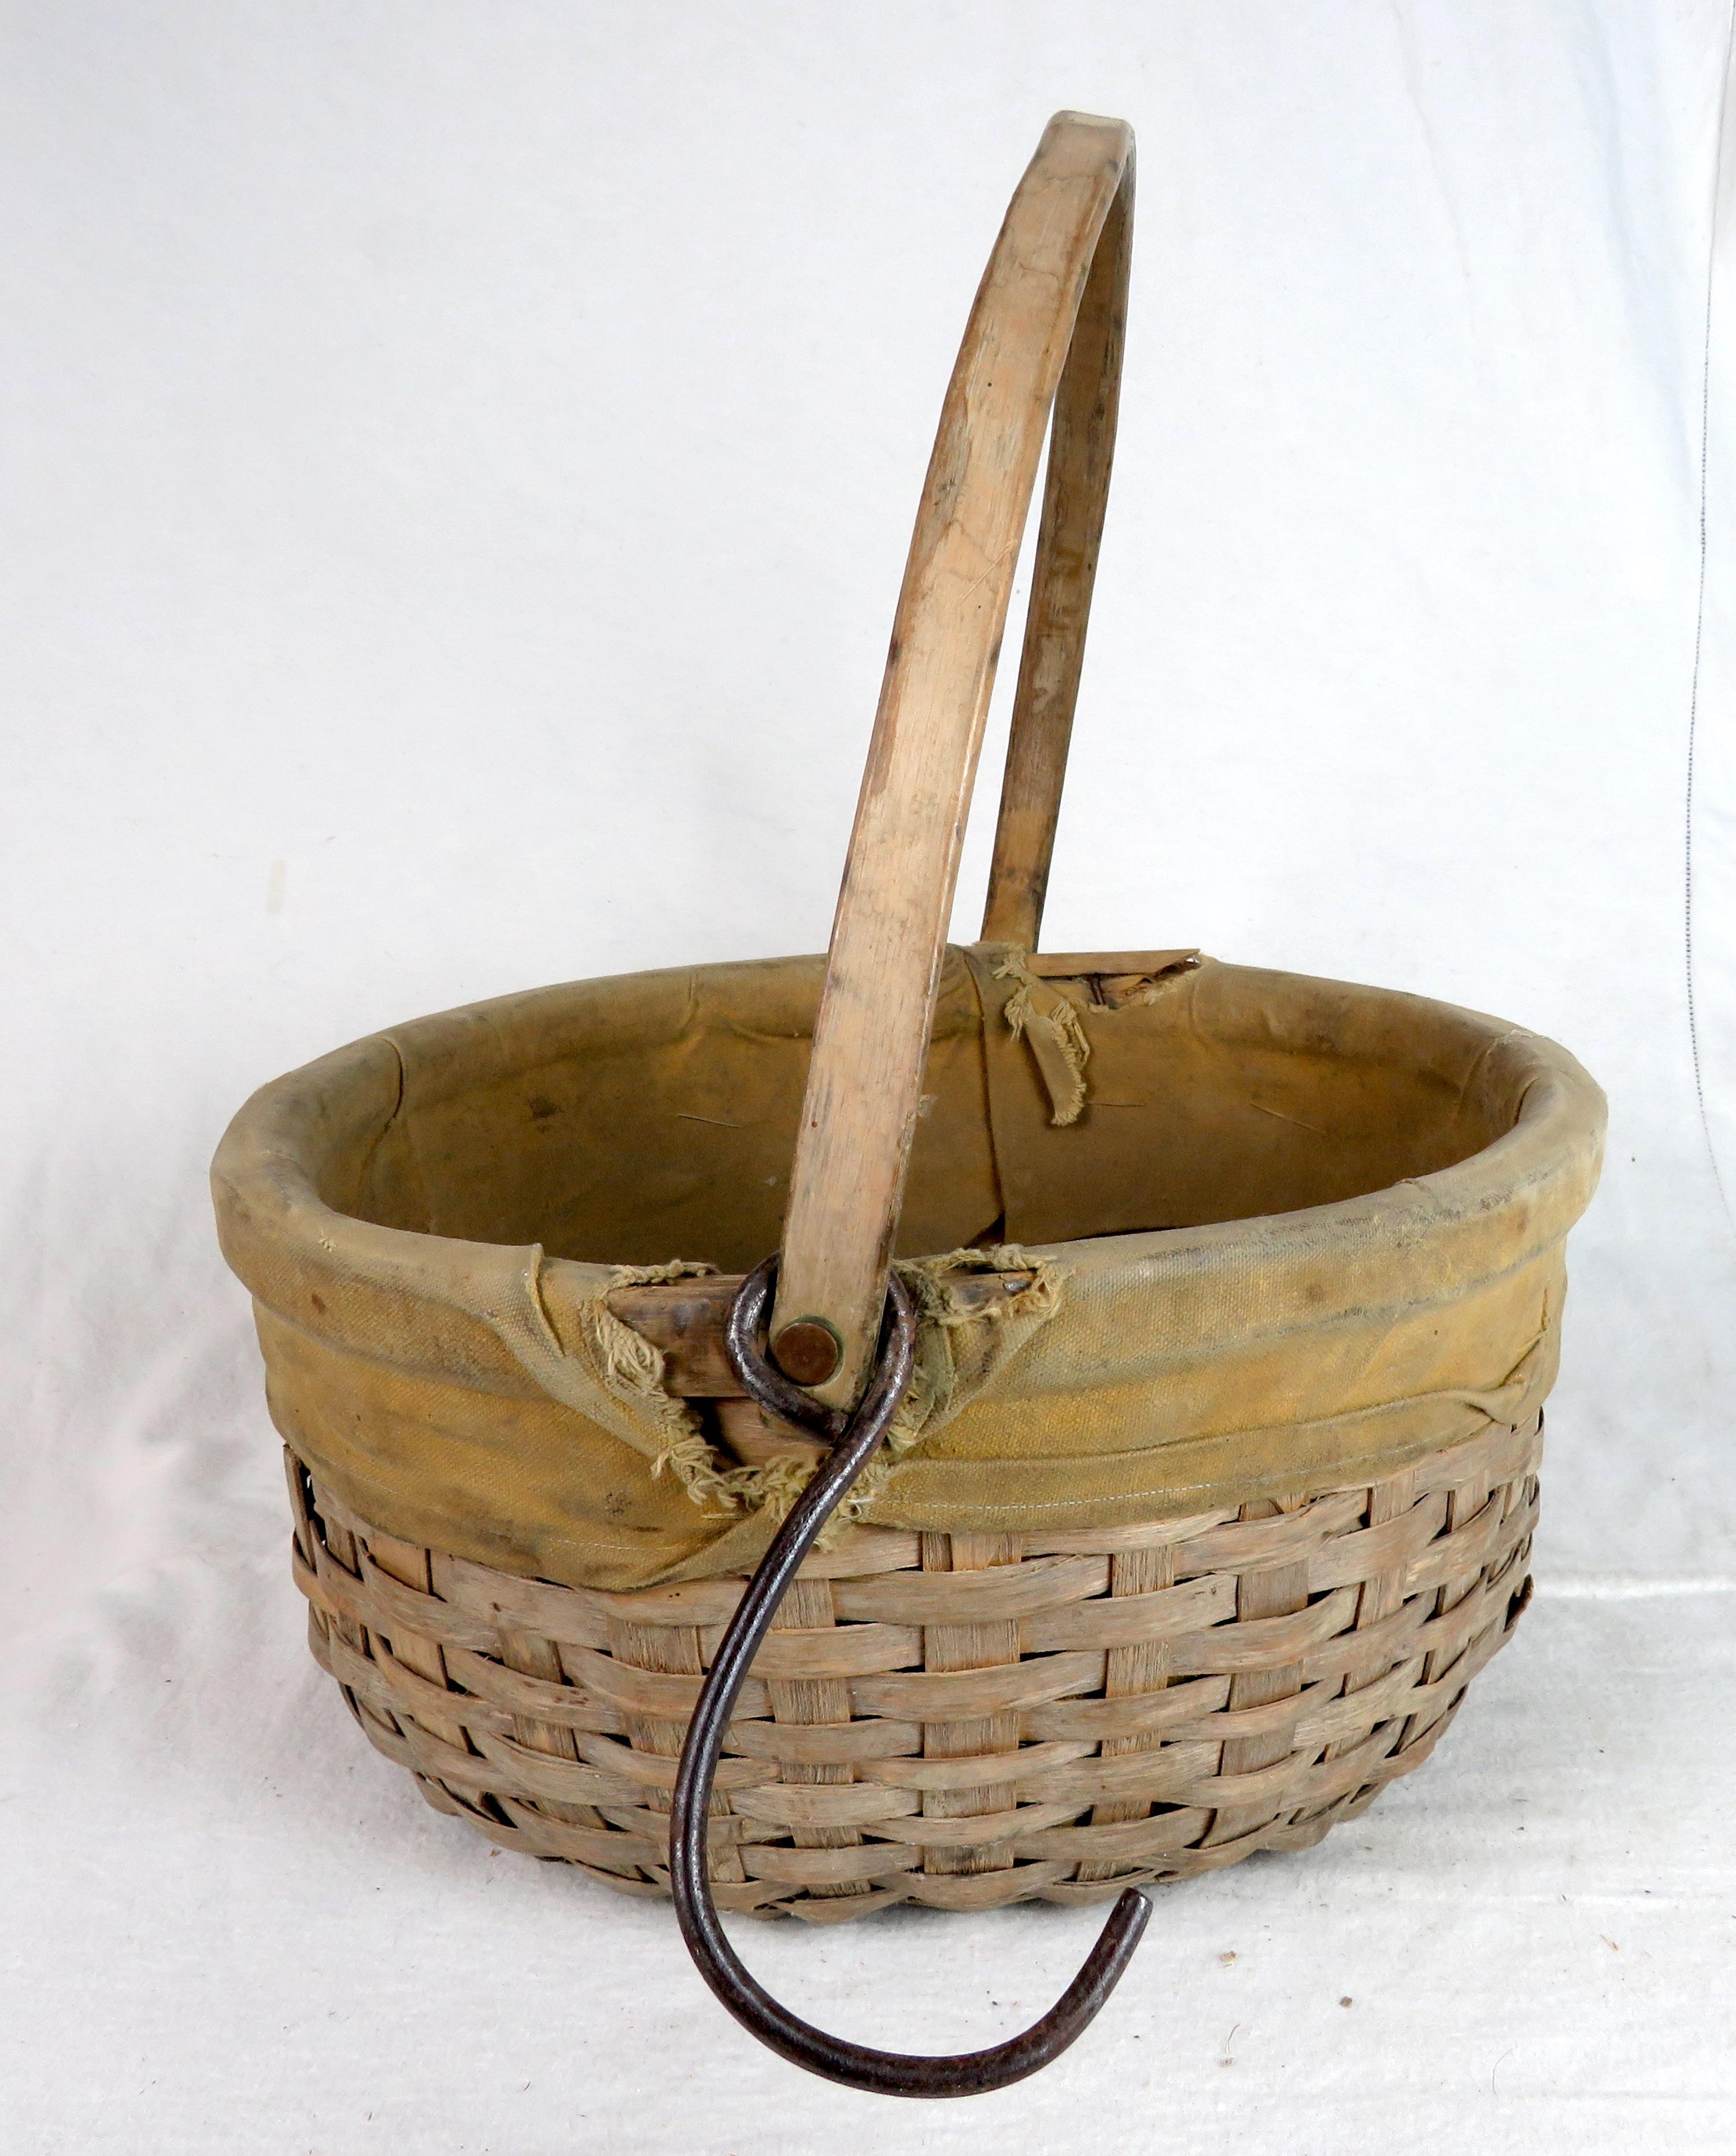 Hand-Woven Canadian Swing Handled Basket with Canvas Lining, Circa 1900 For Sale